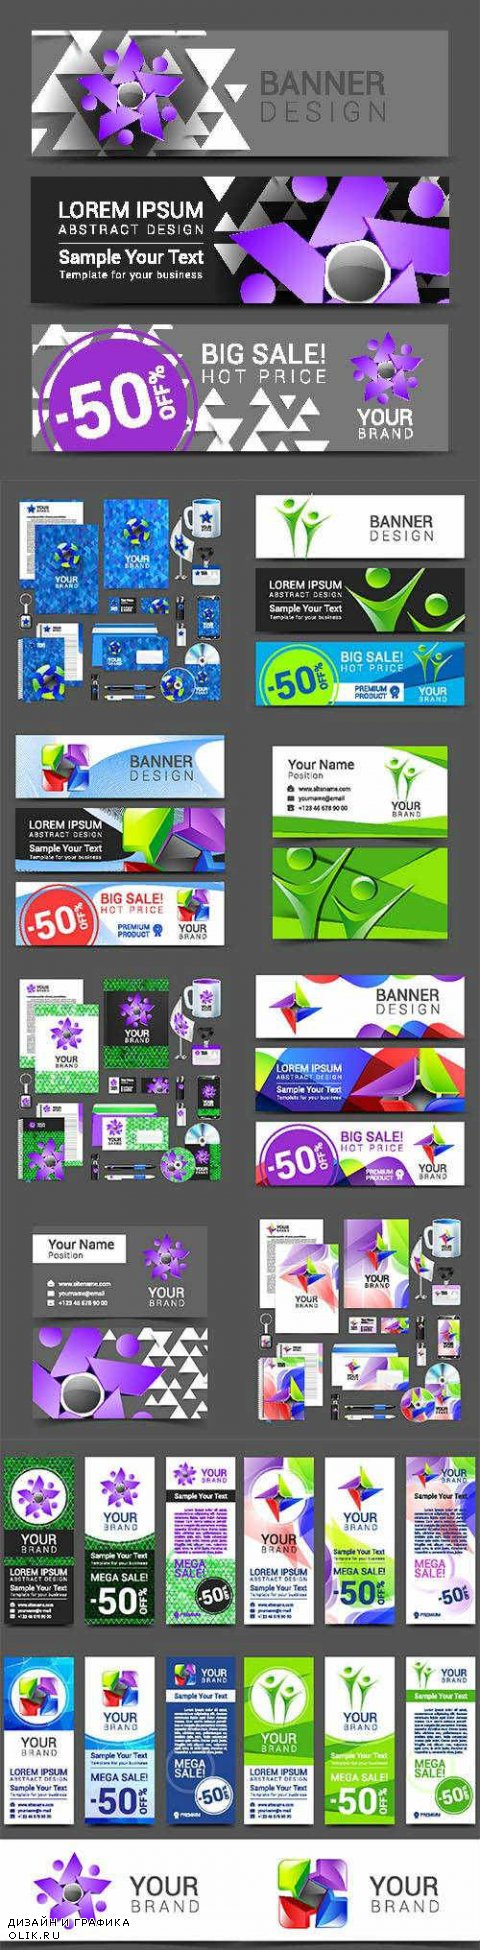 Vector - Corporate style banners and business cards